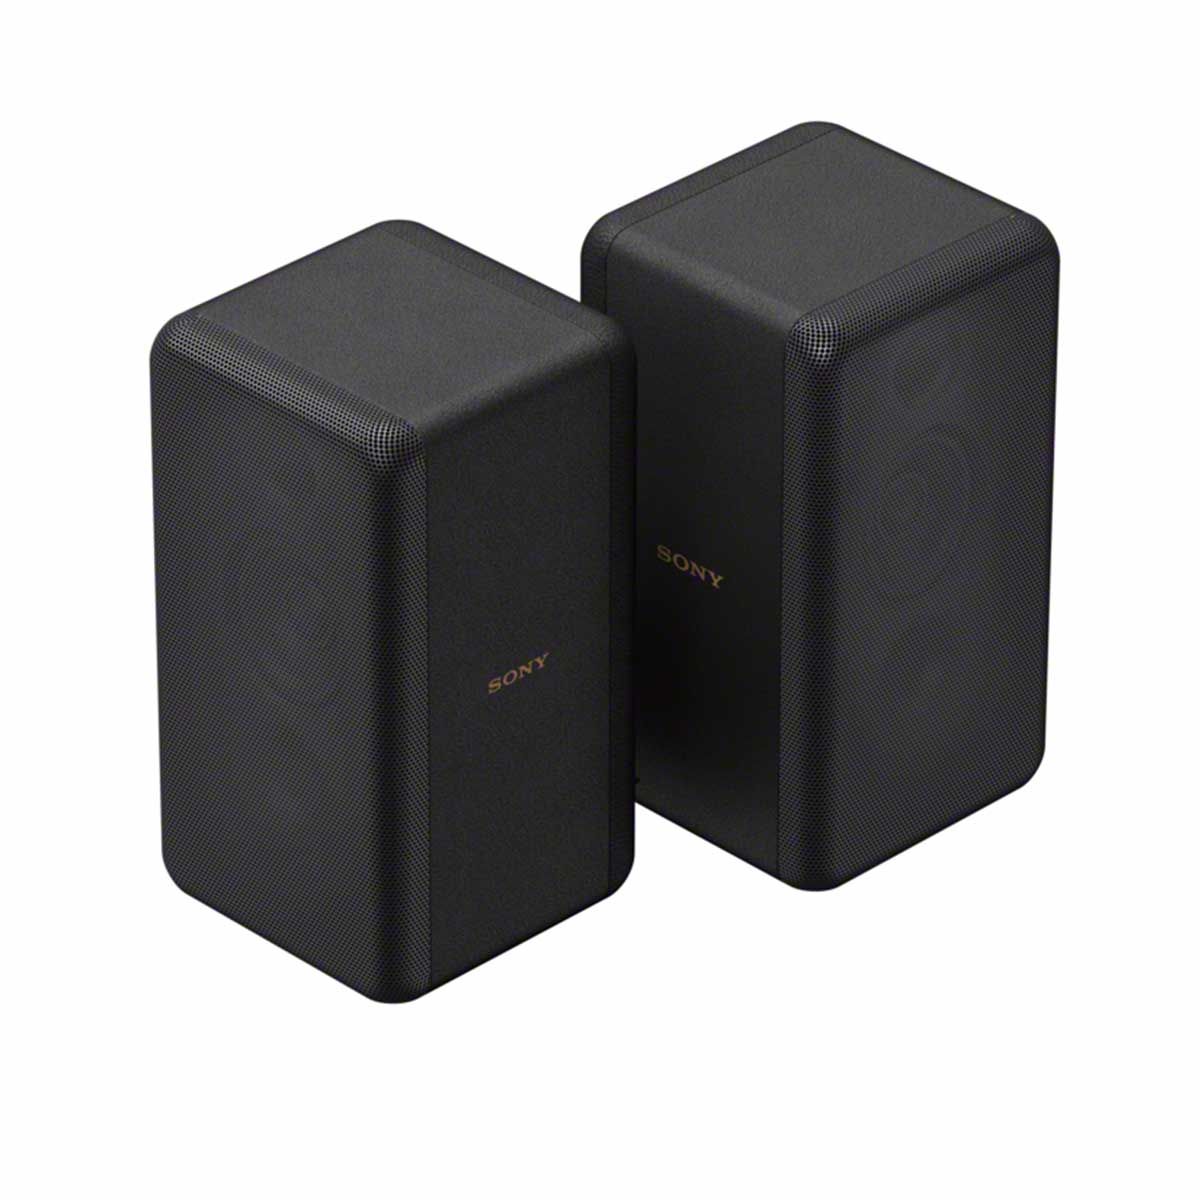 Sony SA-RS3S Wireless Rear Surround Speakers, set of two at an angle